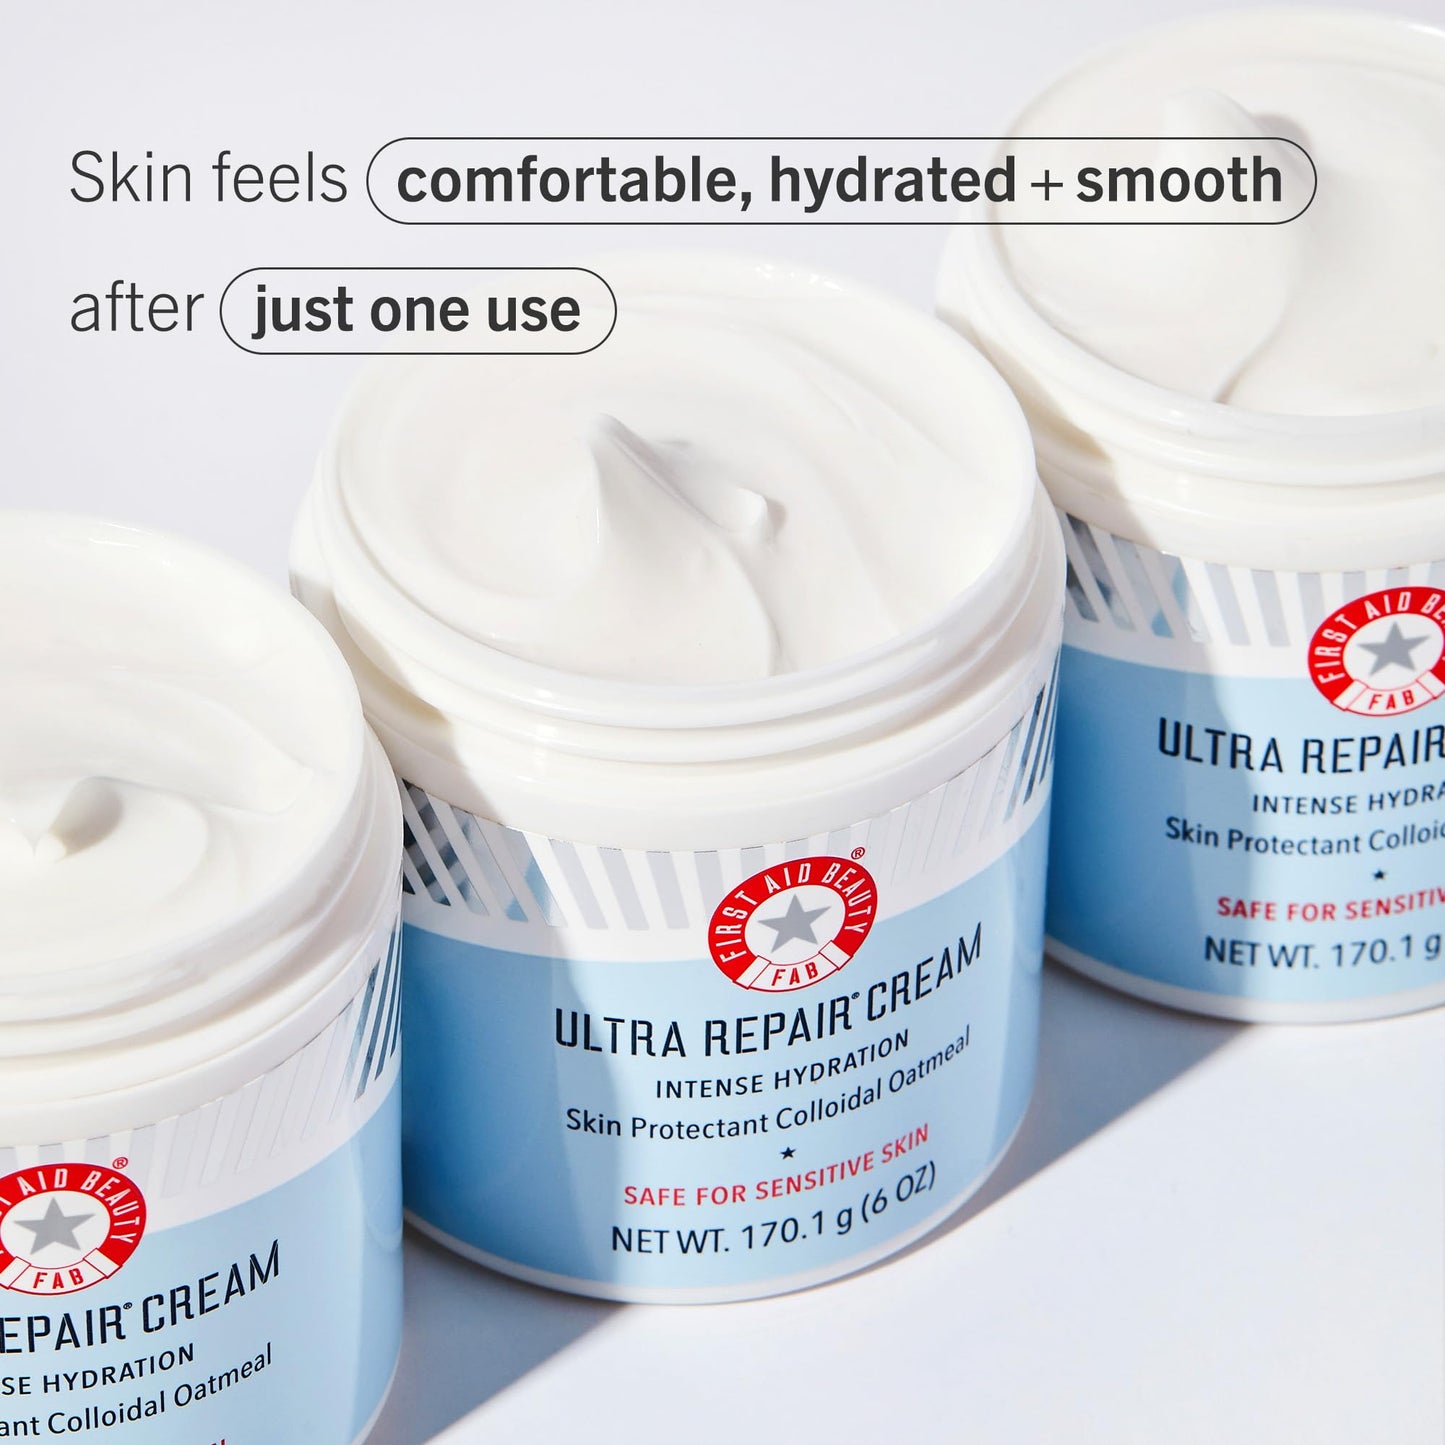 First Aid Beauty Ultra Repair Cream Intense Hydration Moisturizer for Face and Body - 8 oz.